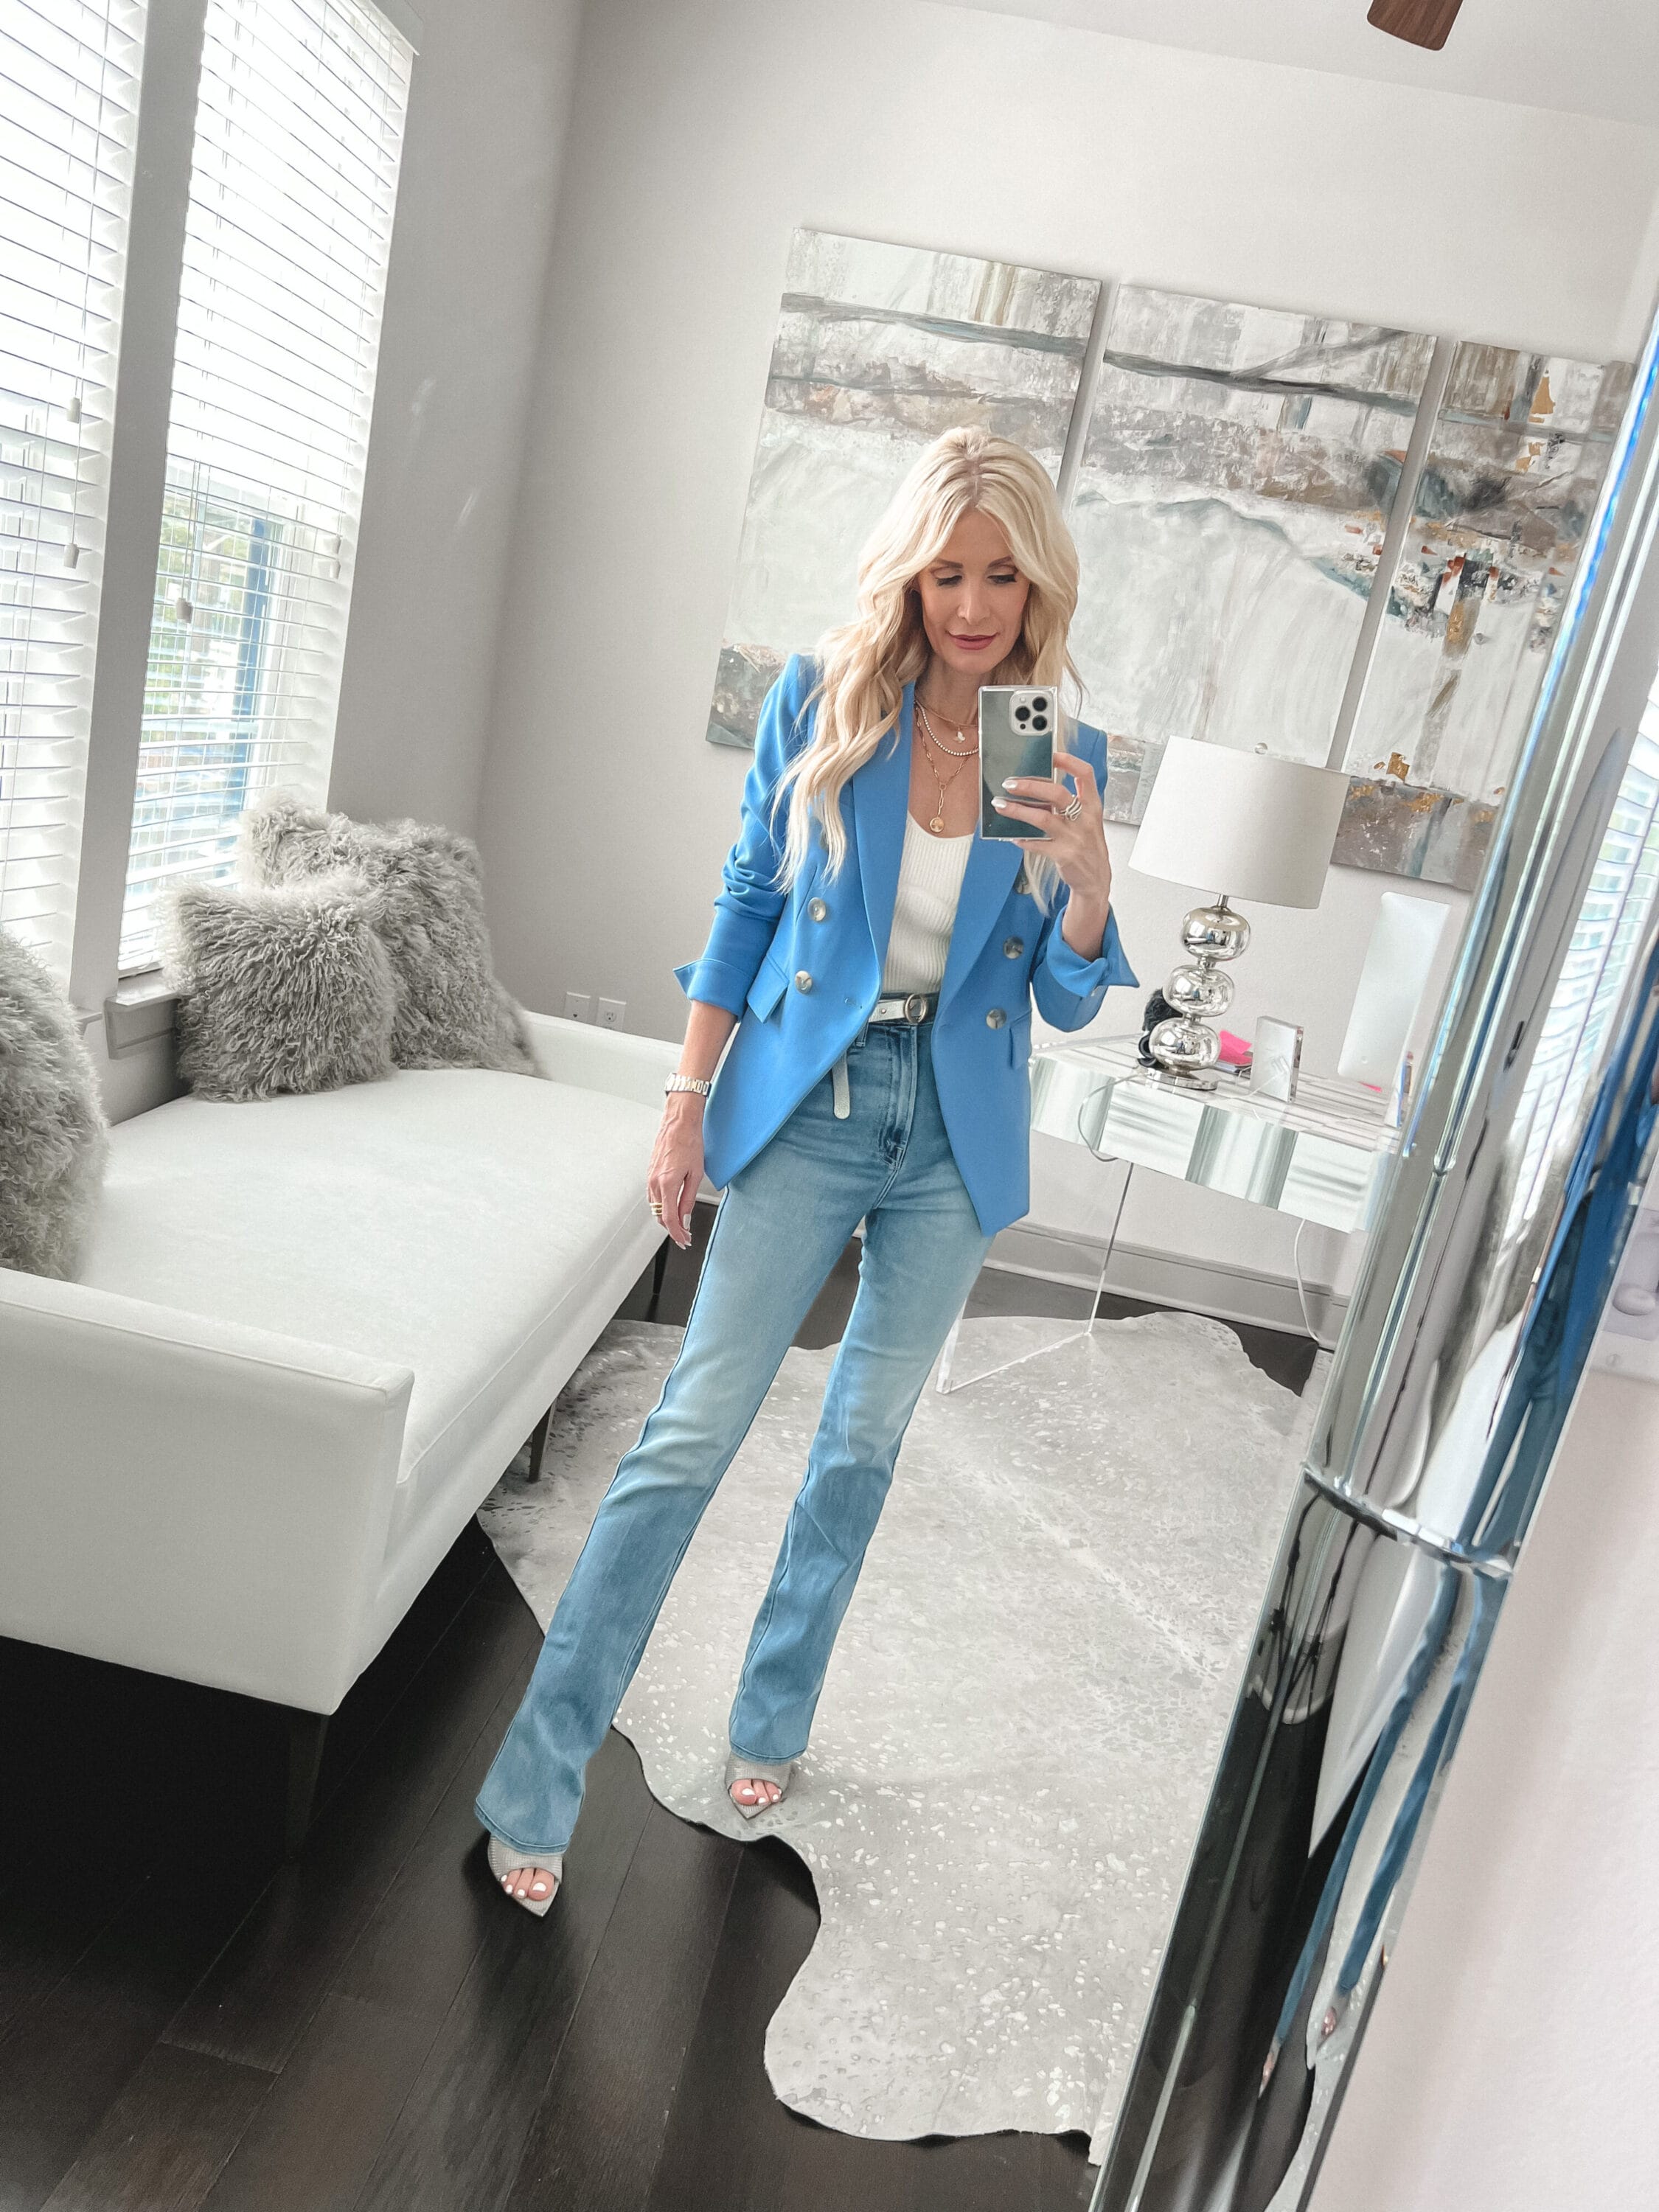 Over 40 fashion influencer from Dallas wearing blue Veronica Beard Miller jacket with light wash denim and white top.